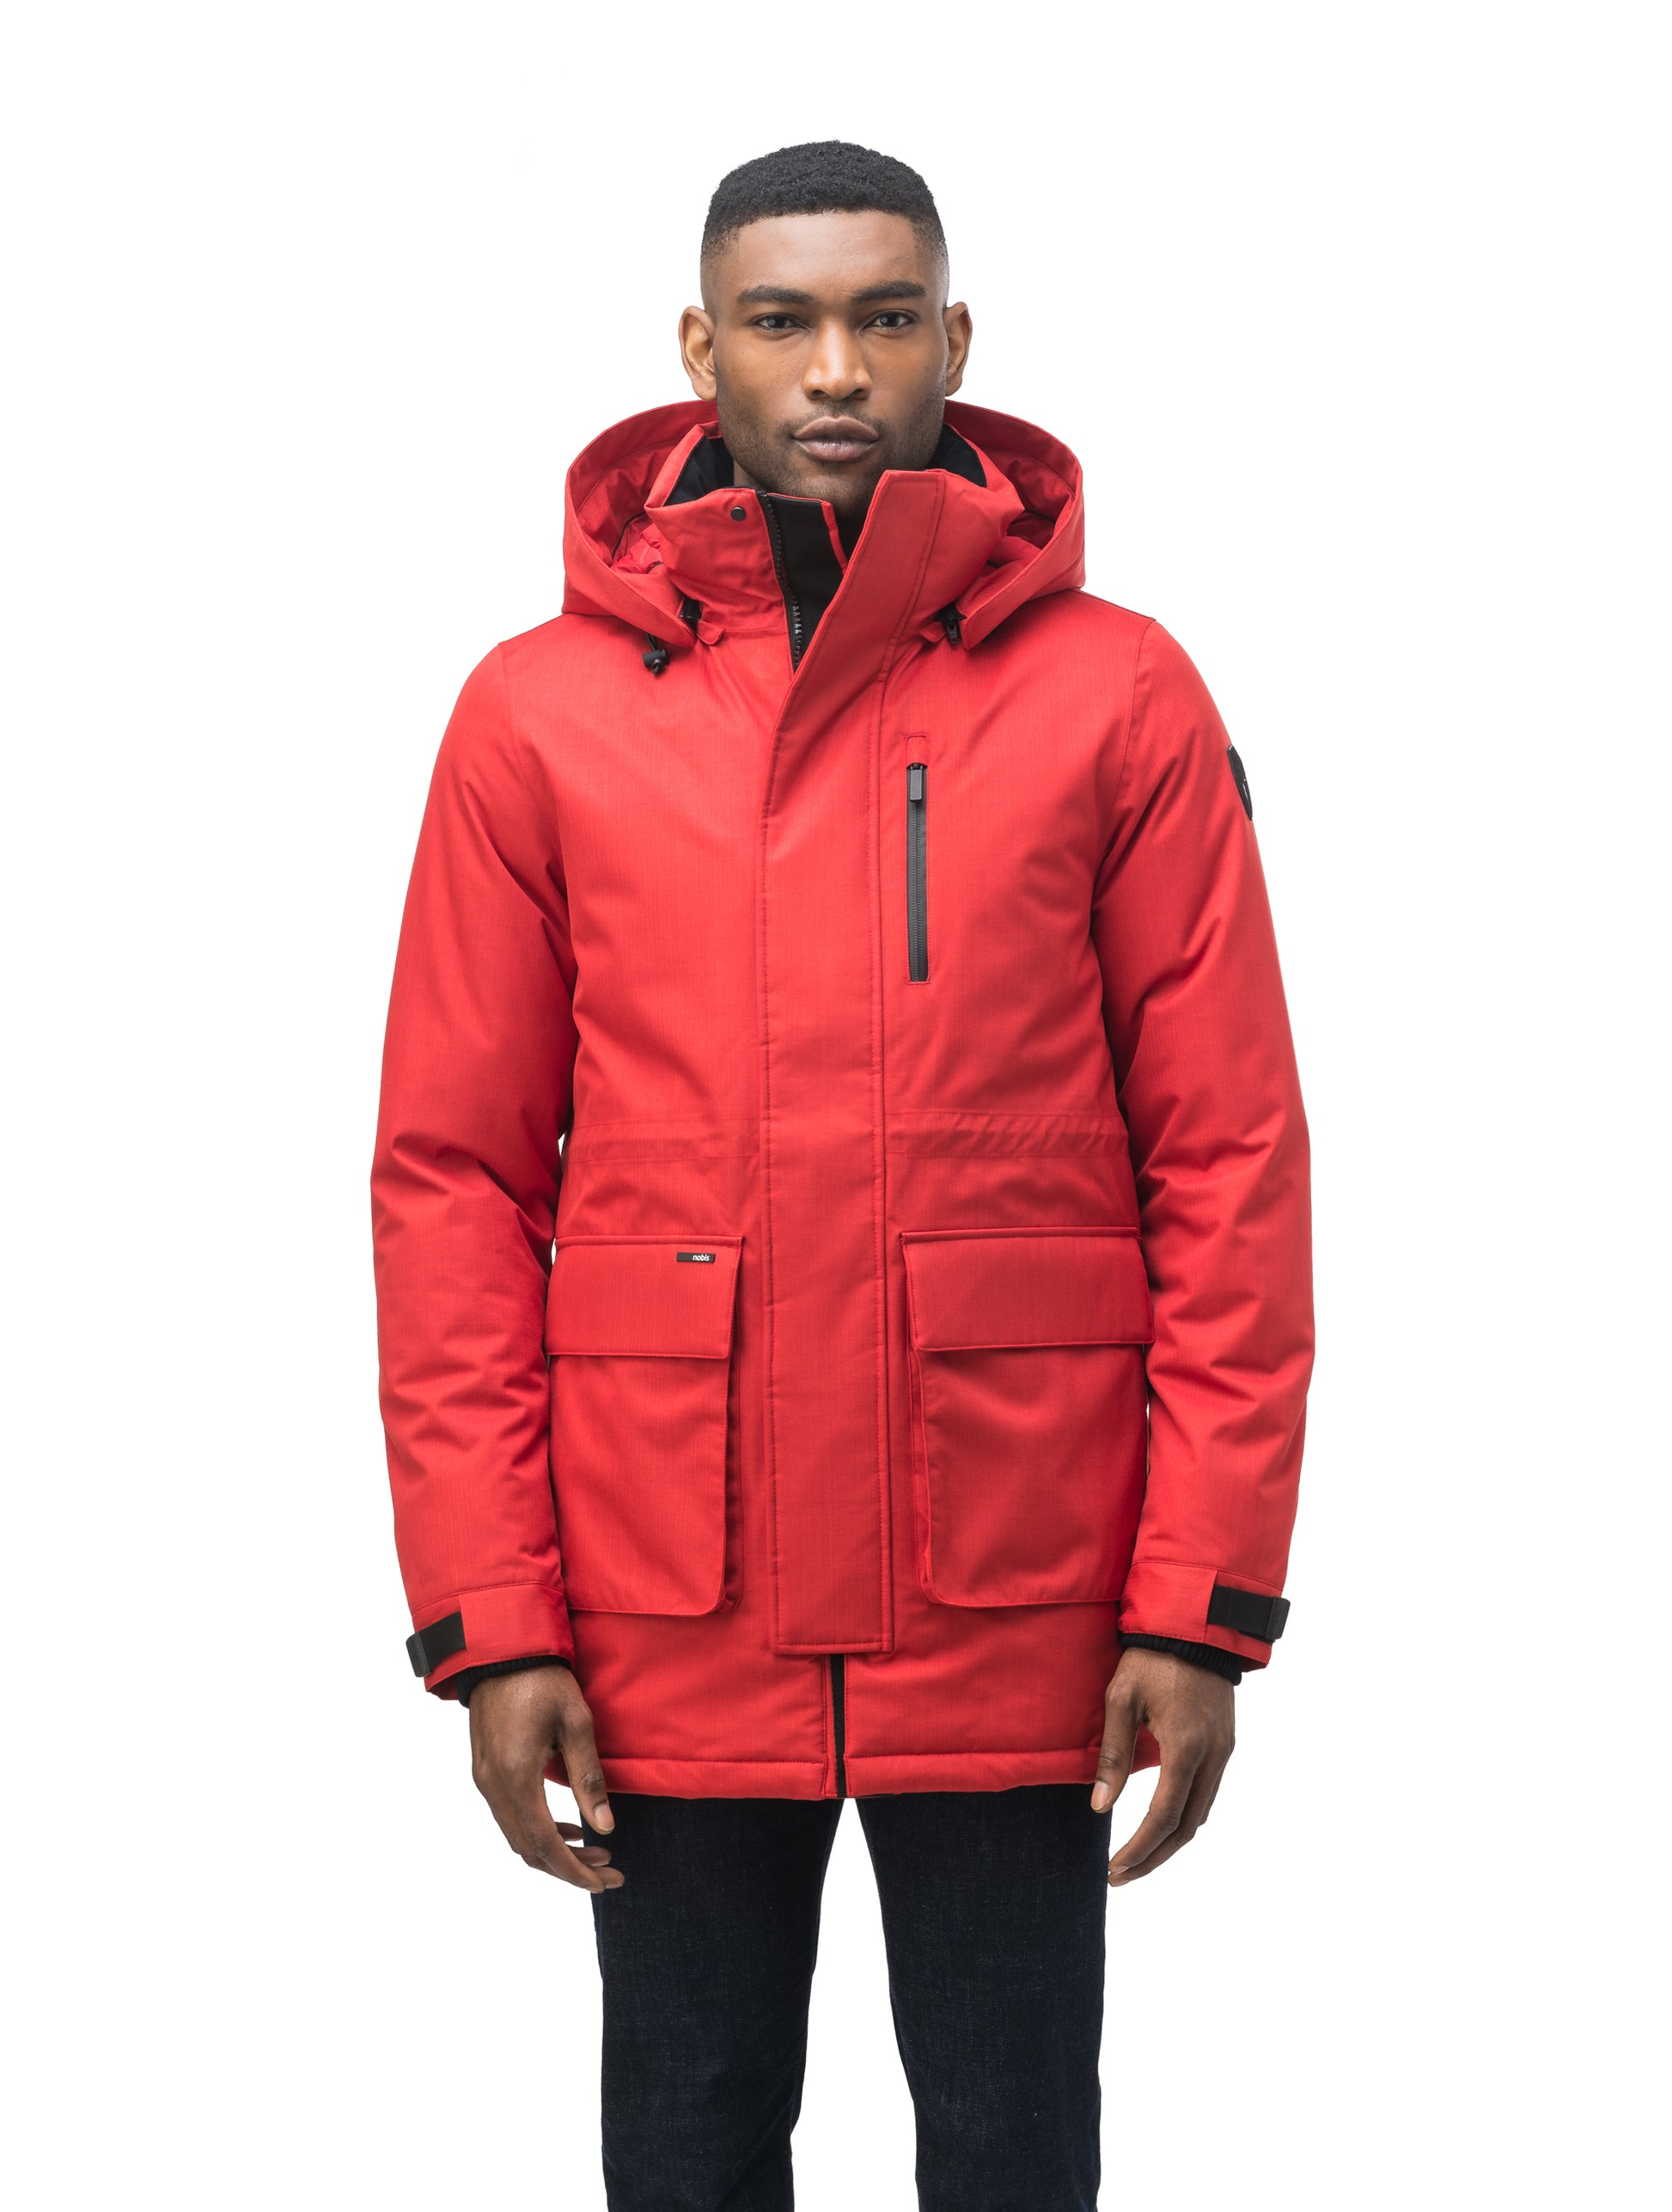 Mid weight men's down filled parka with two patch pockets at the hip and snap closure side vents in Vermillion